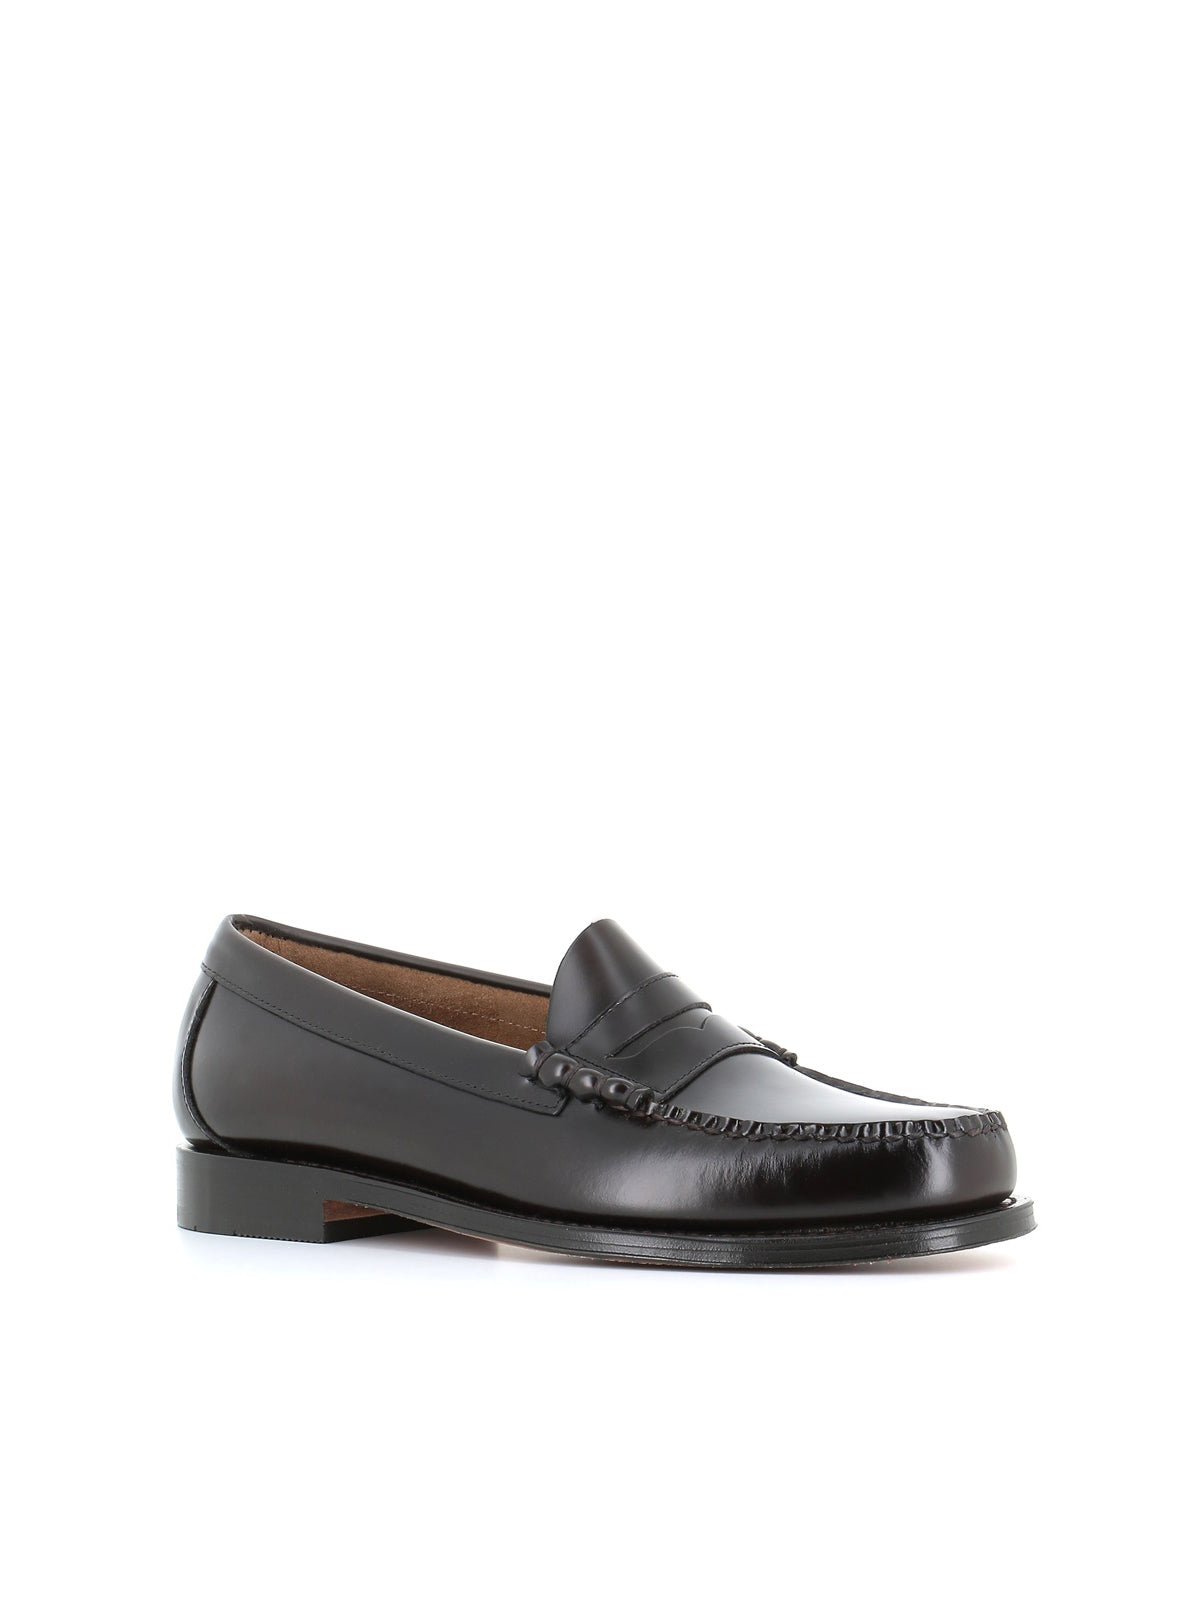  Loafer Larson Weejuns By G.h Bass & Co. Uomo Marrone - 3